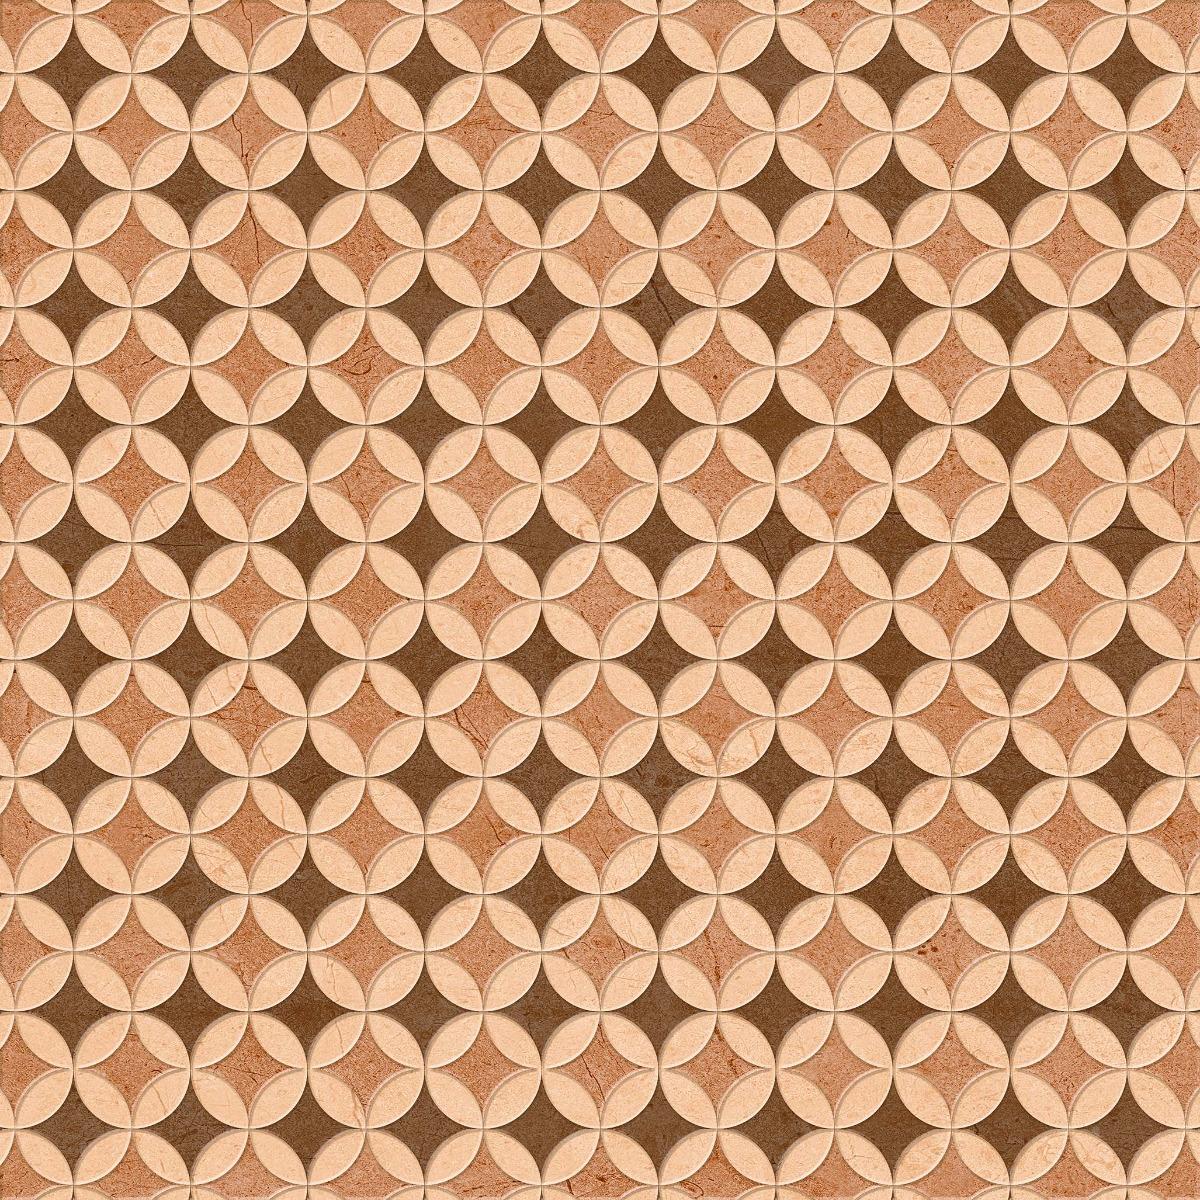 Stylized Tiles for Bathroom Tiles, Living Room Tiles, Bedroom Tiles, Accent Tiles, Hospital Tiles, High Traffic Tiles, Bar/Restaurant, Commercial/Office, Outdoor Area, School & Collages